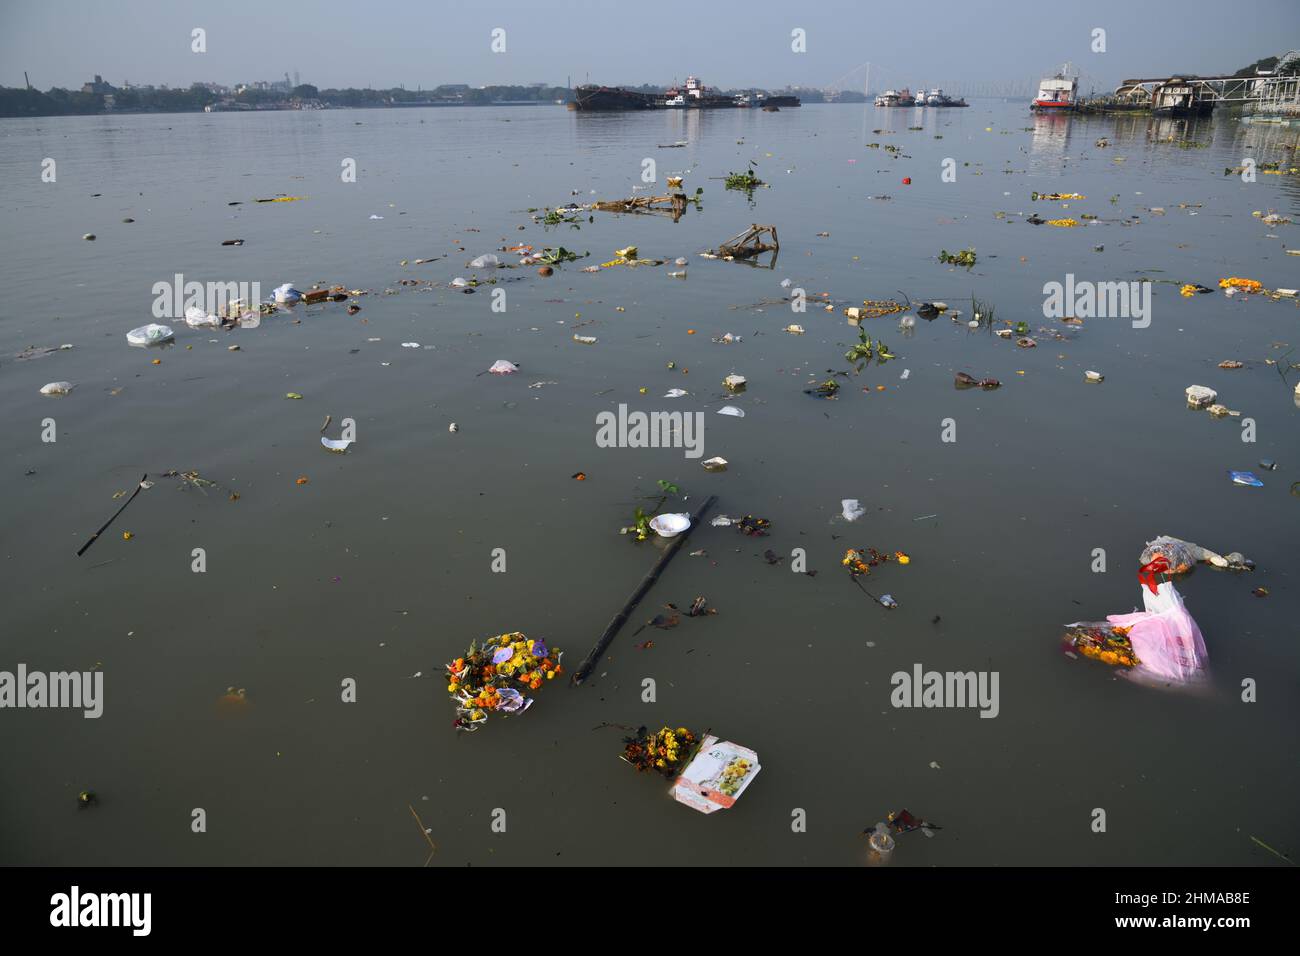 Floating garbage due to idol immersion on the Ganges water, Kolkata, West Bengal, India. Stock Photo